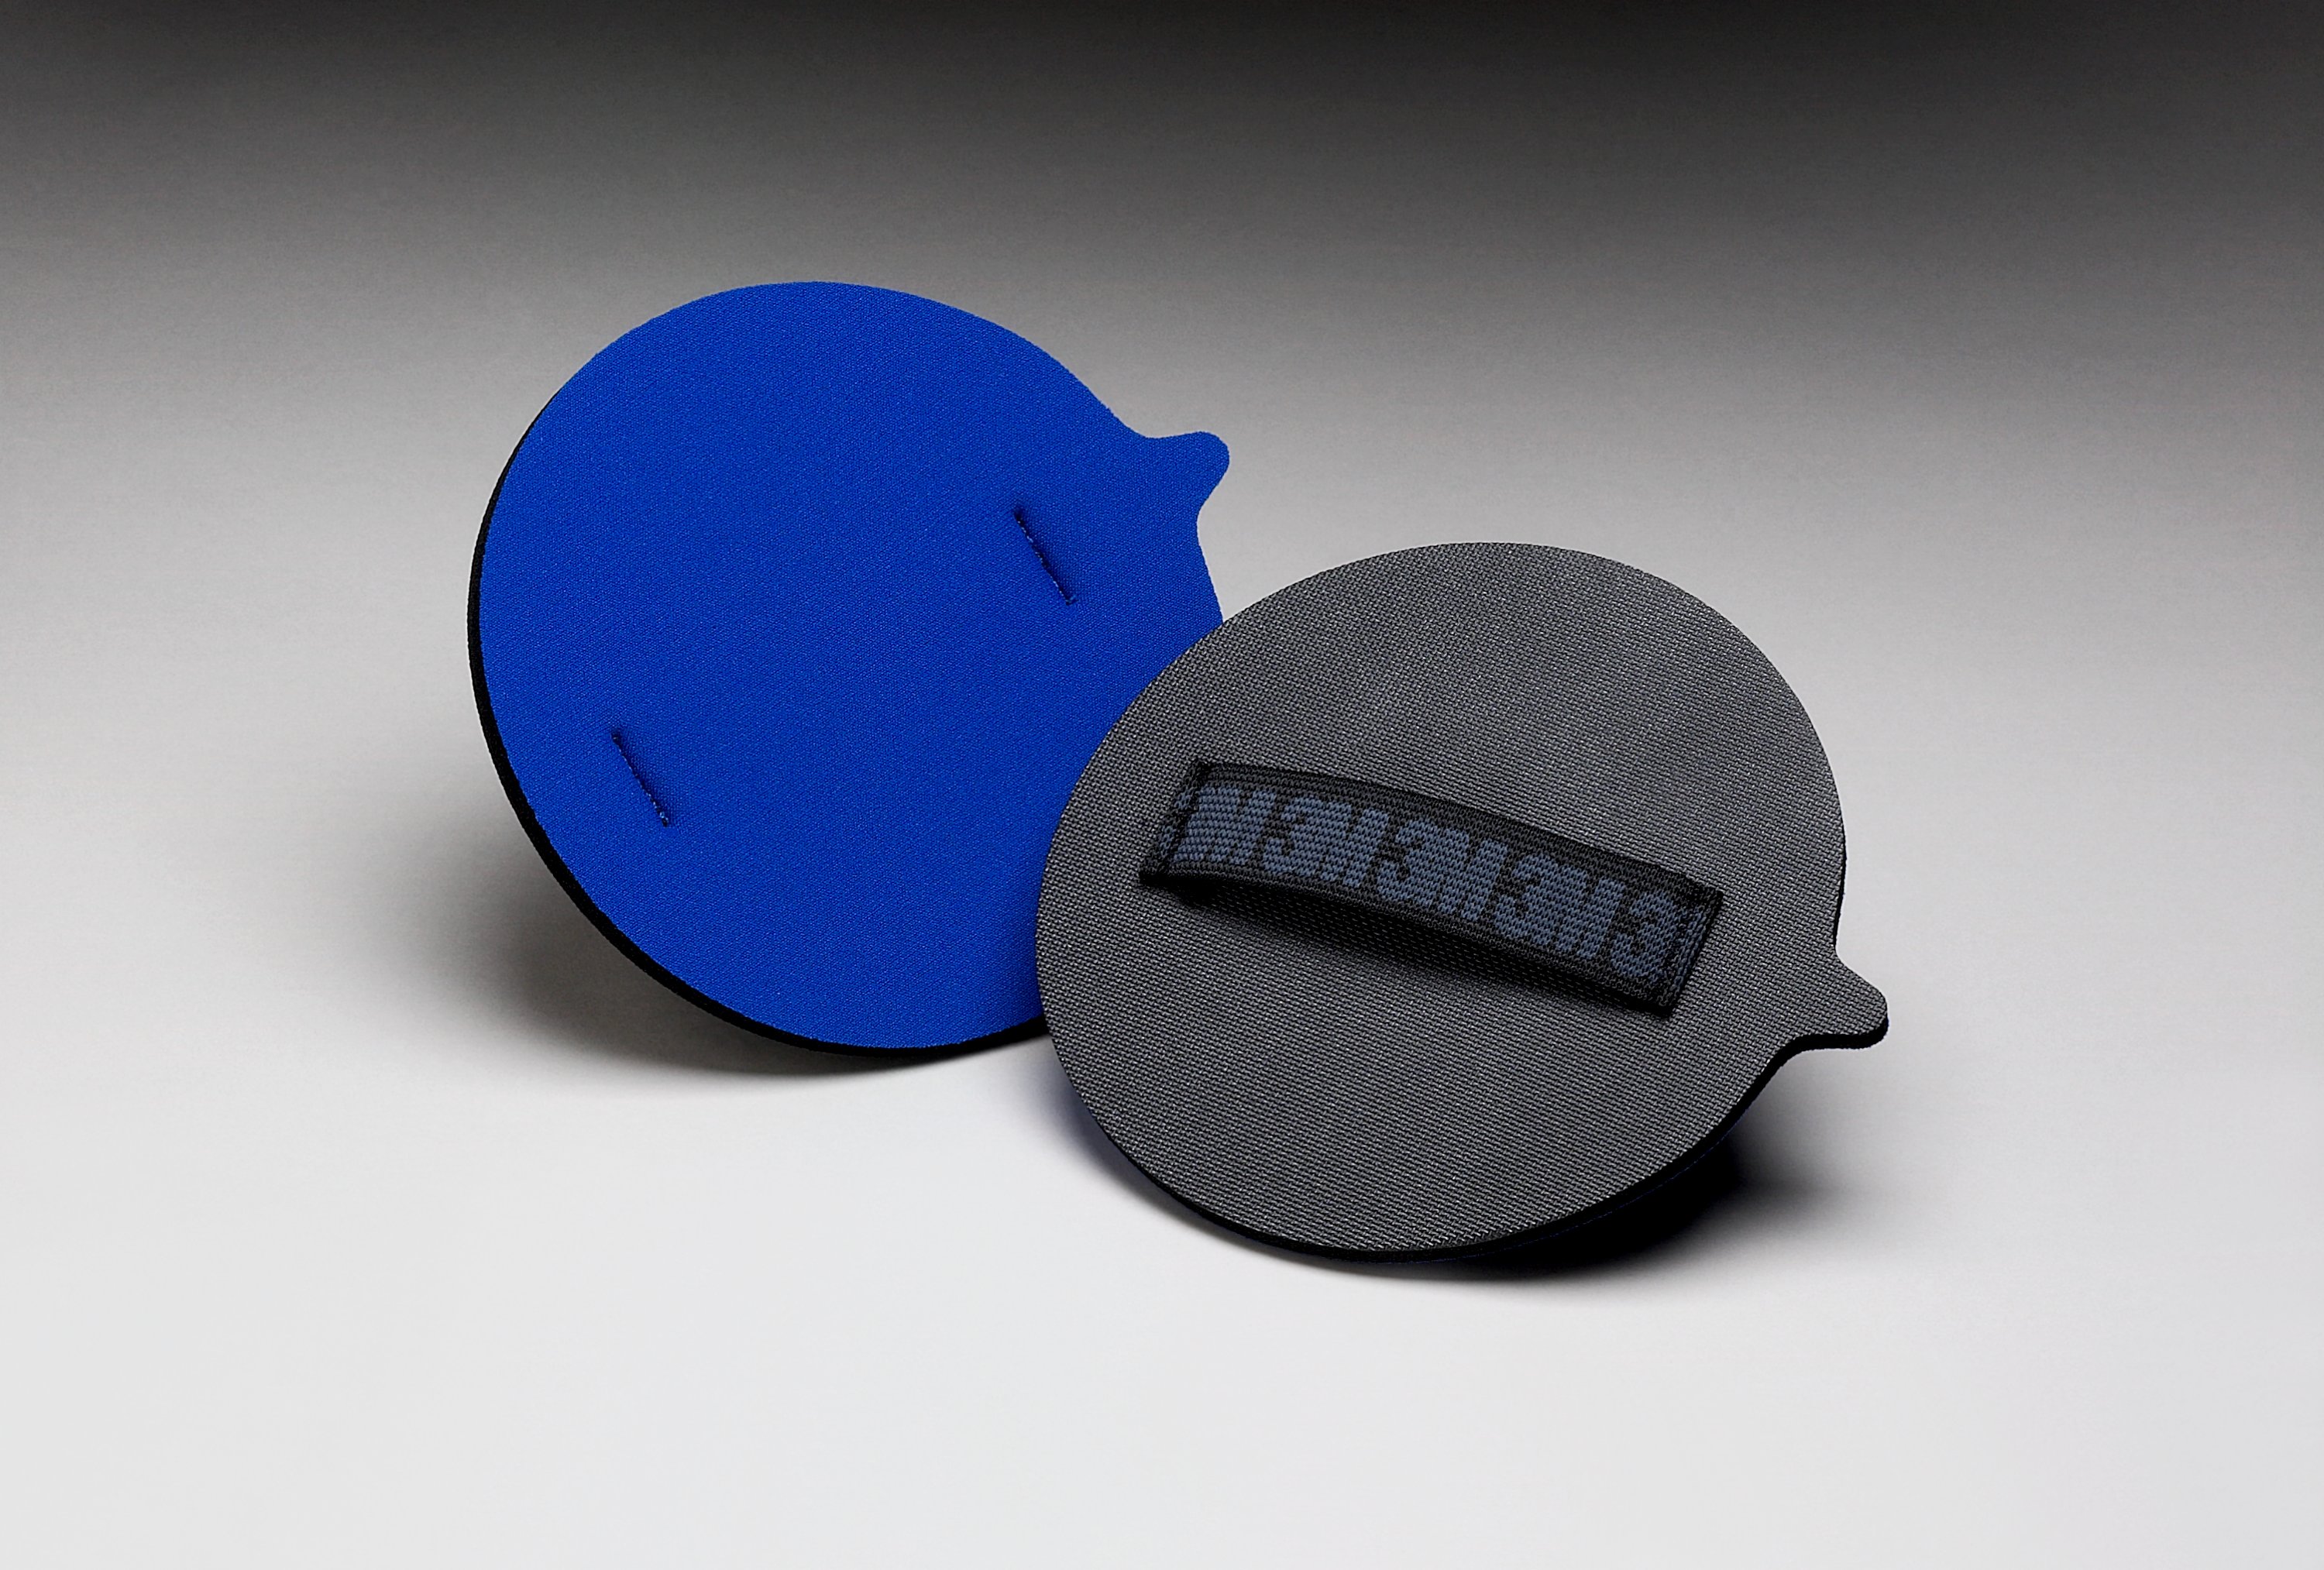 Discs come ready to use with a pressure sensitive adhesive coating on the backs